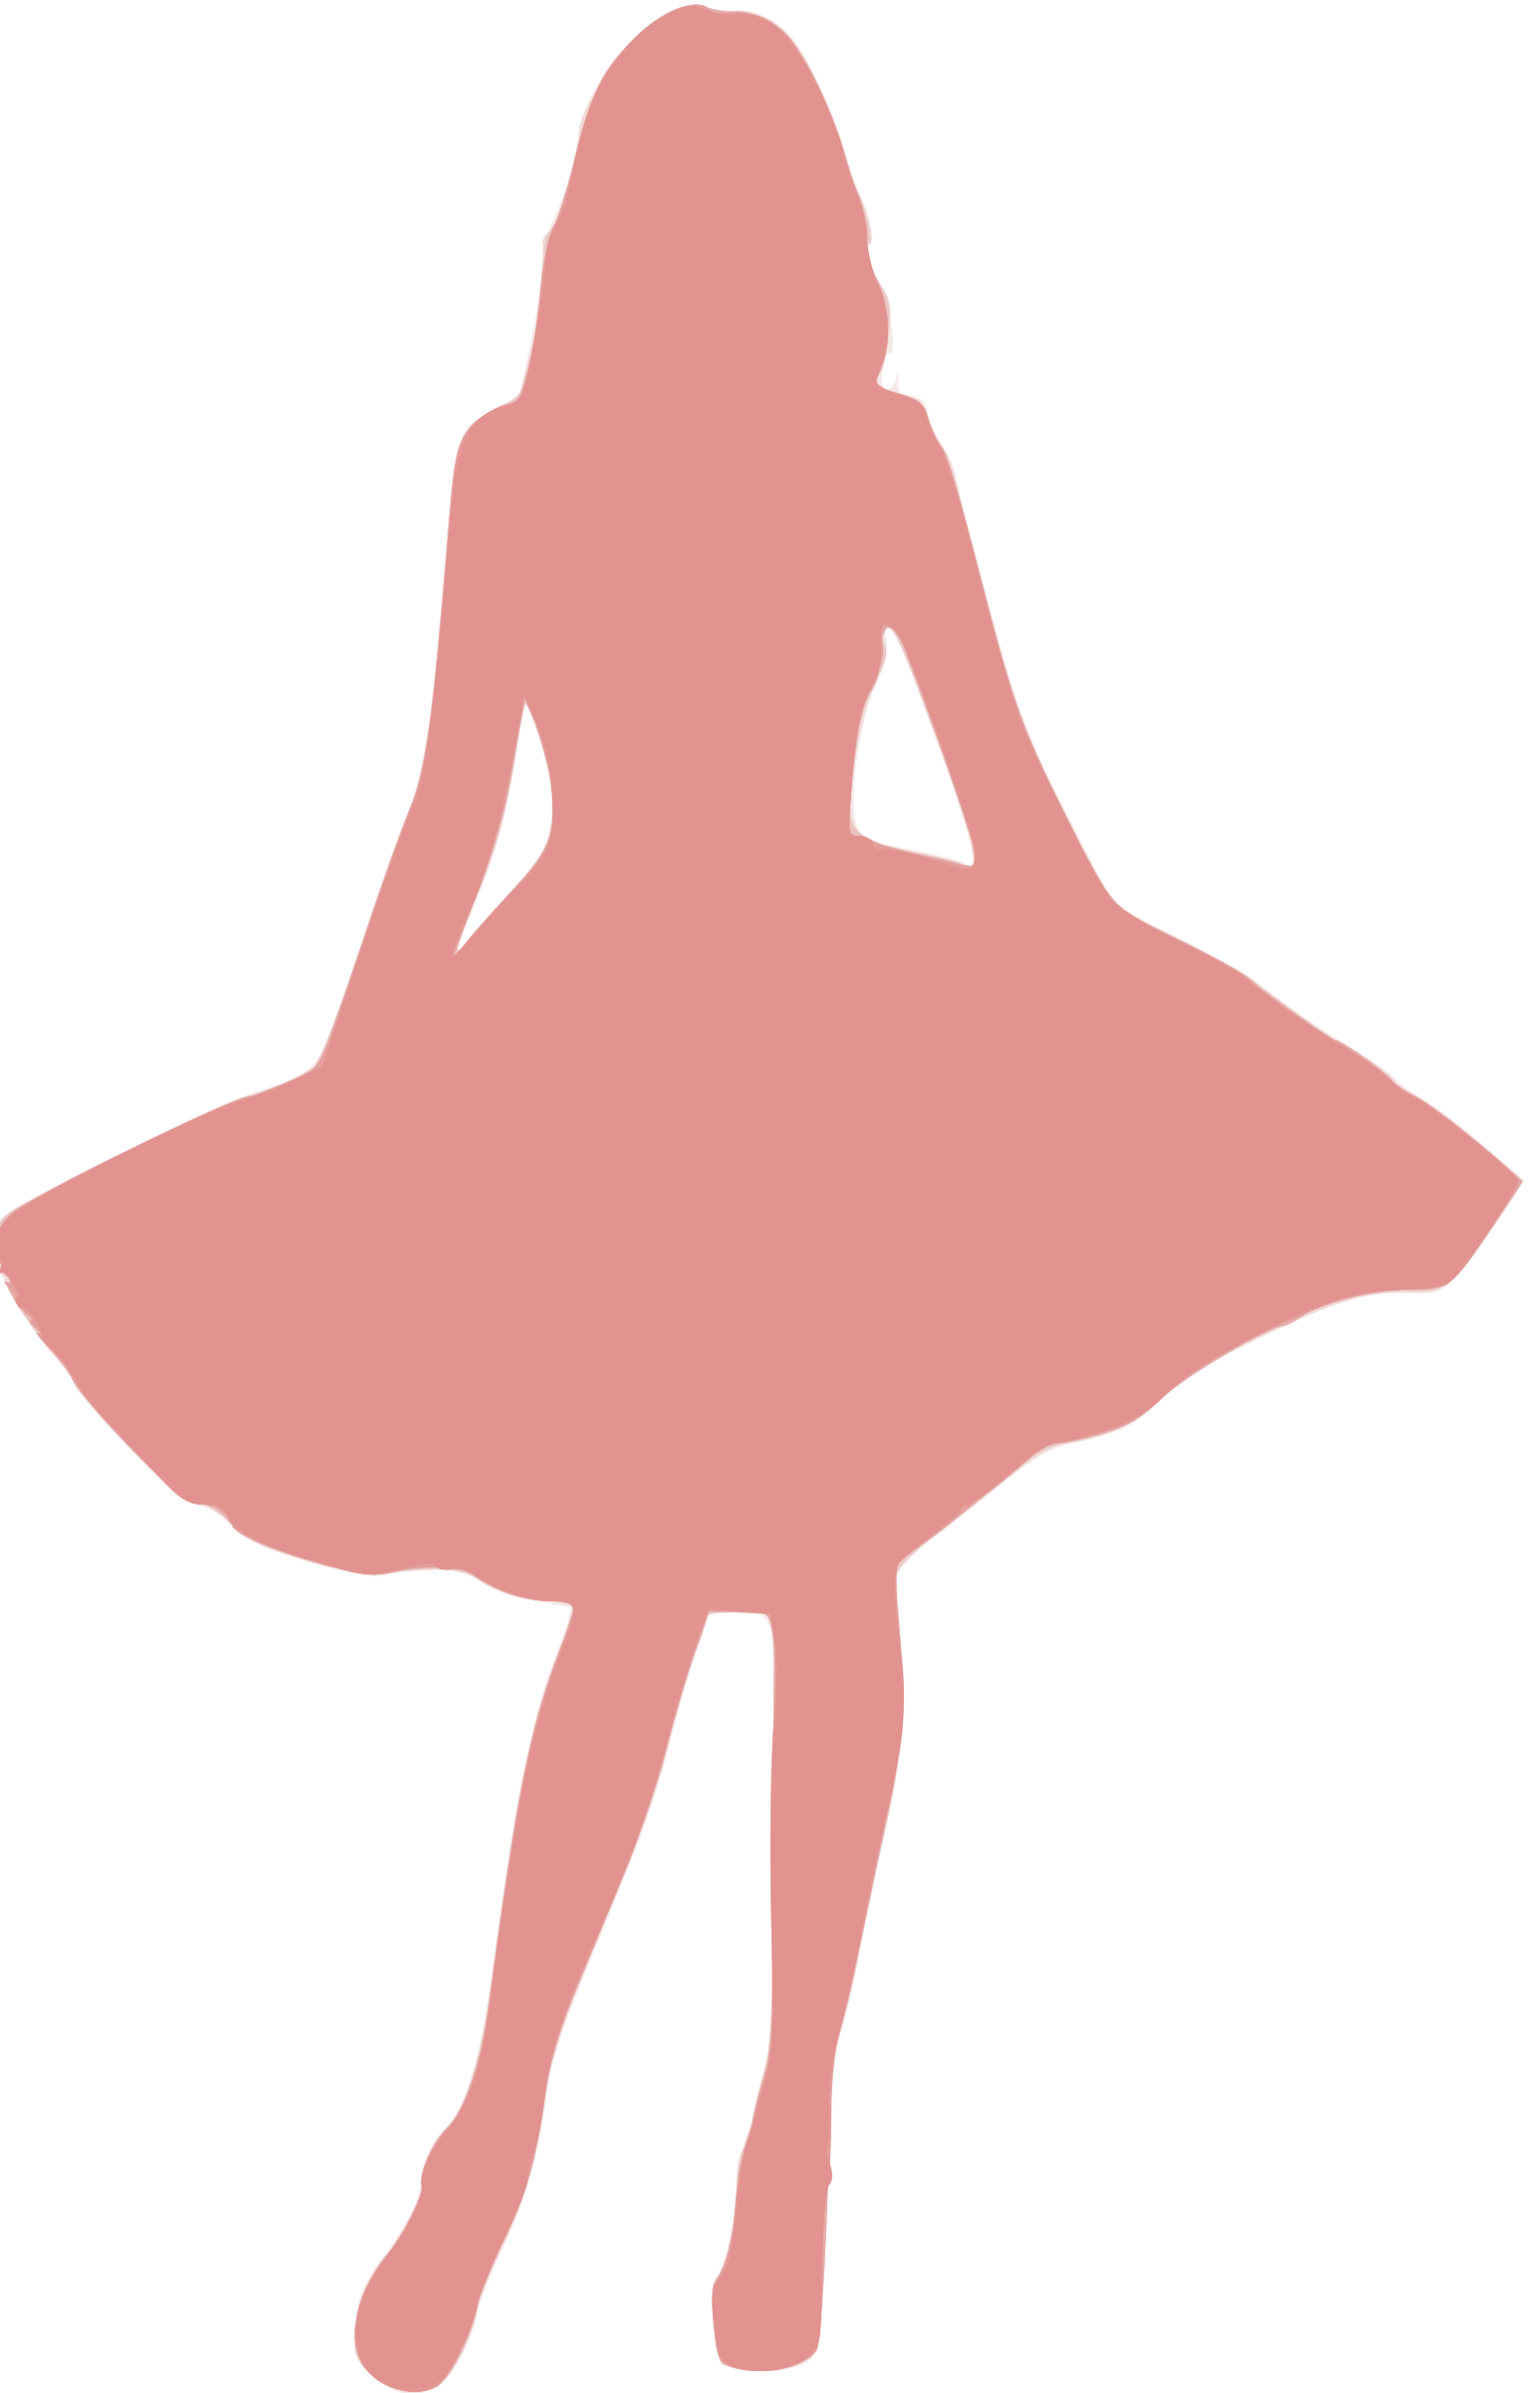 Tutu clipart silhouette. Femme icons png free